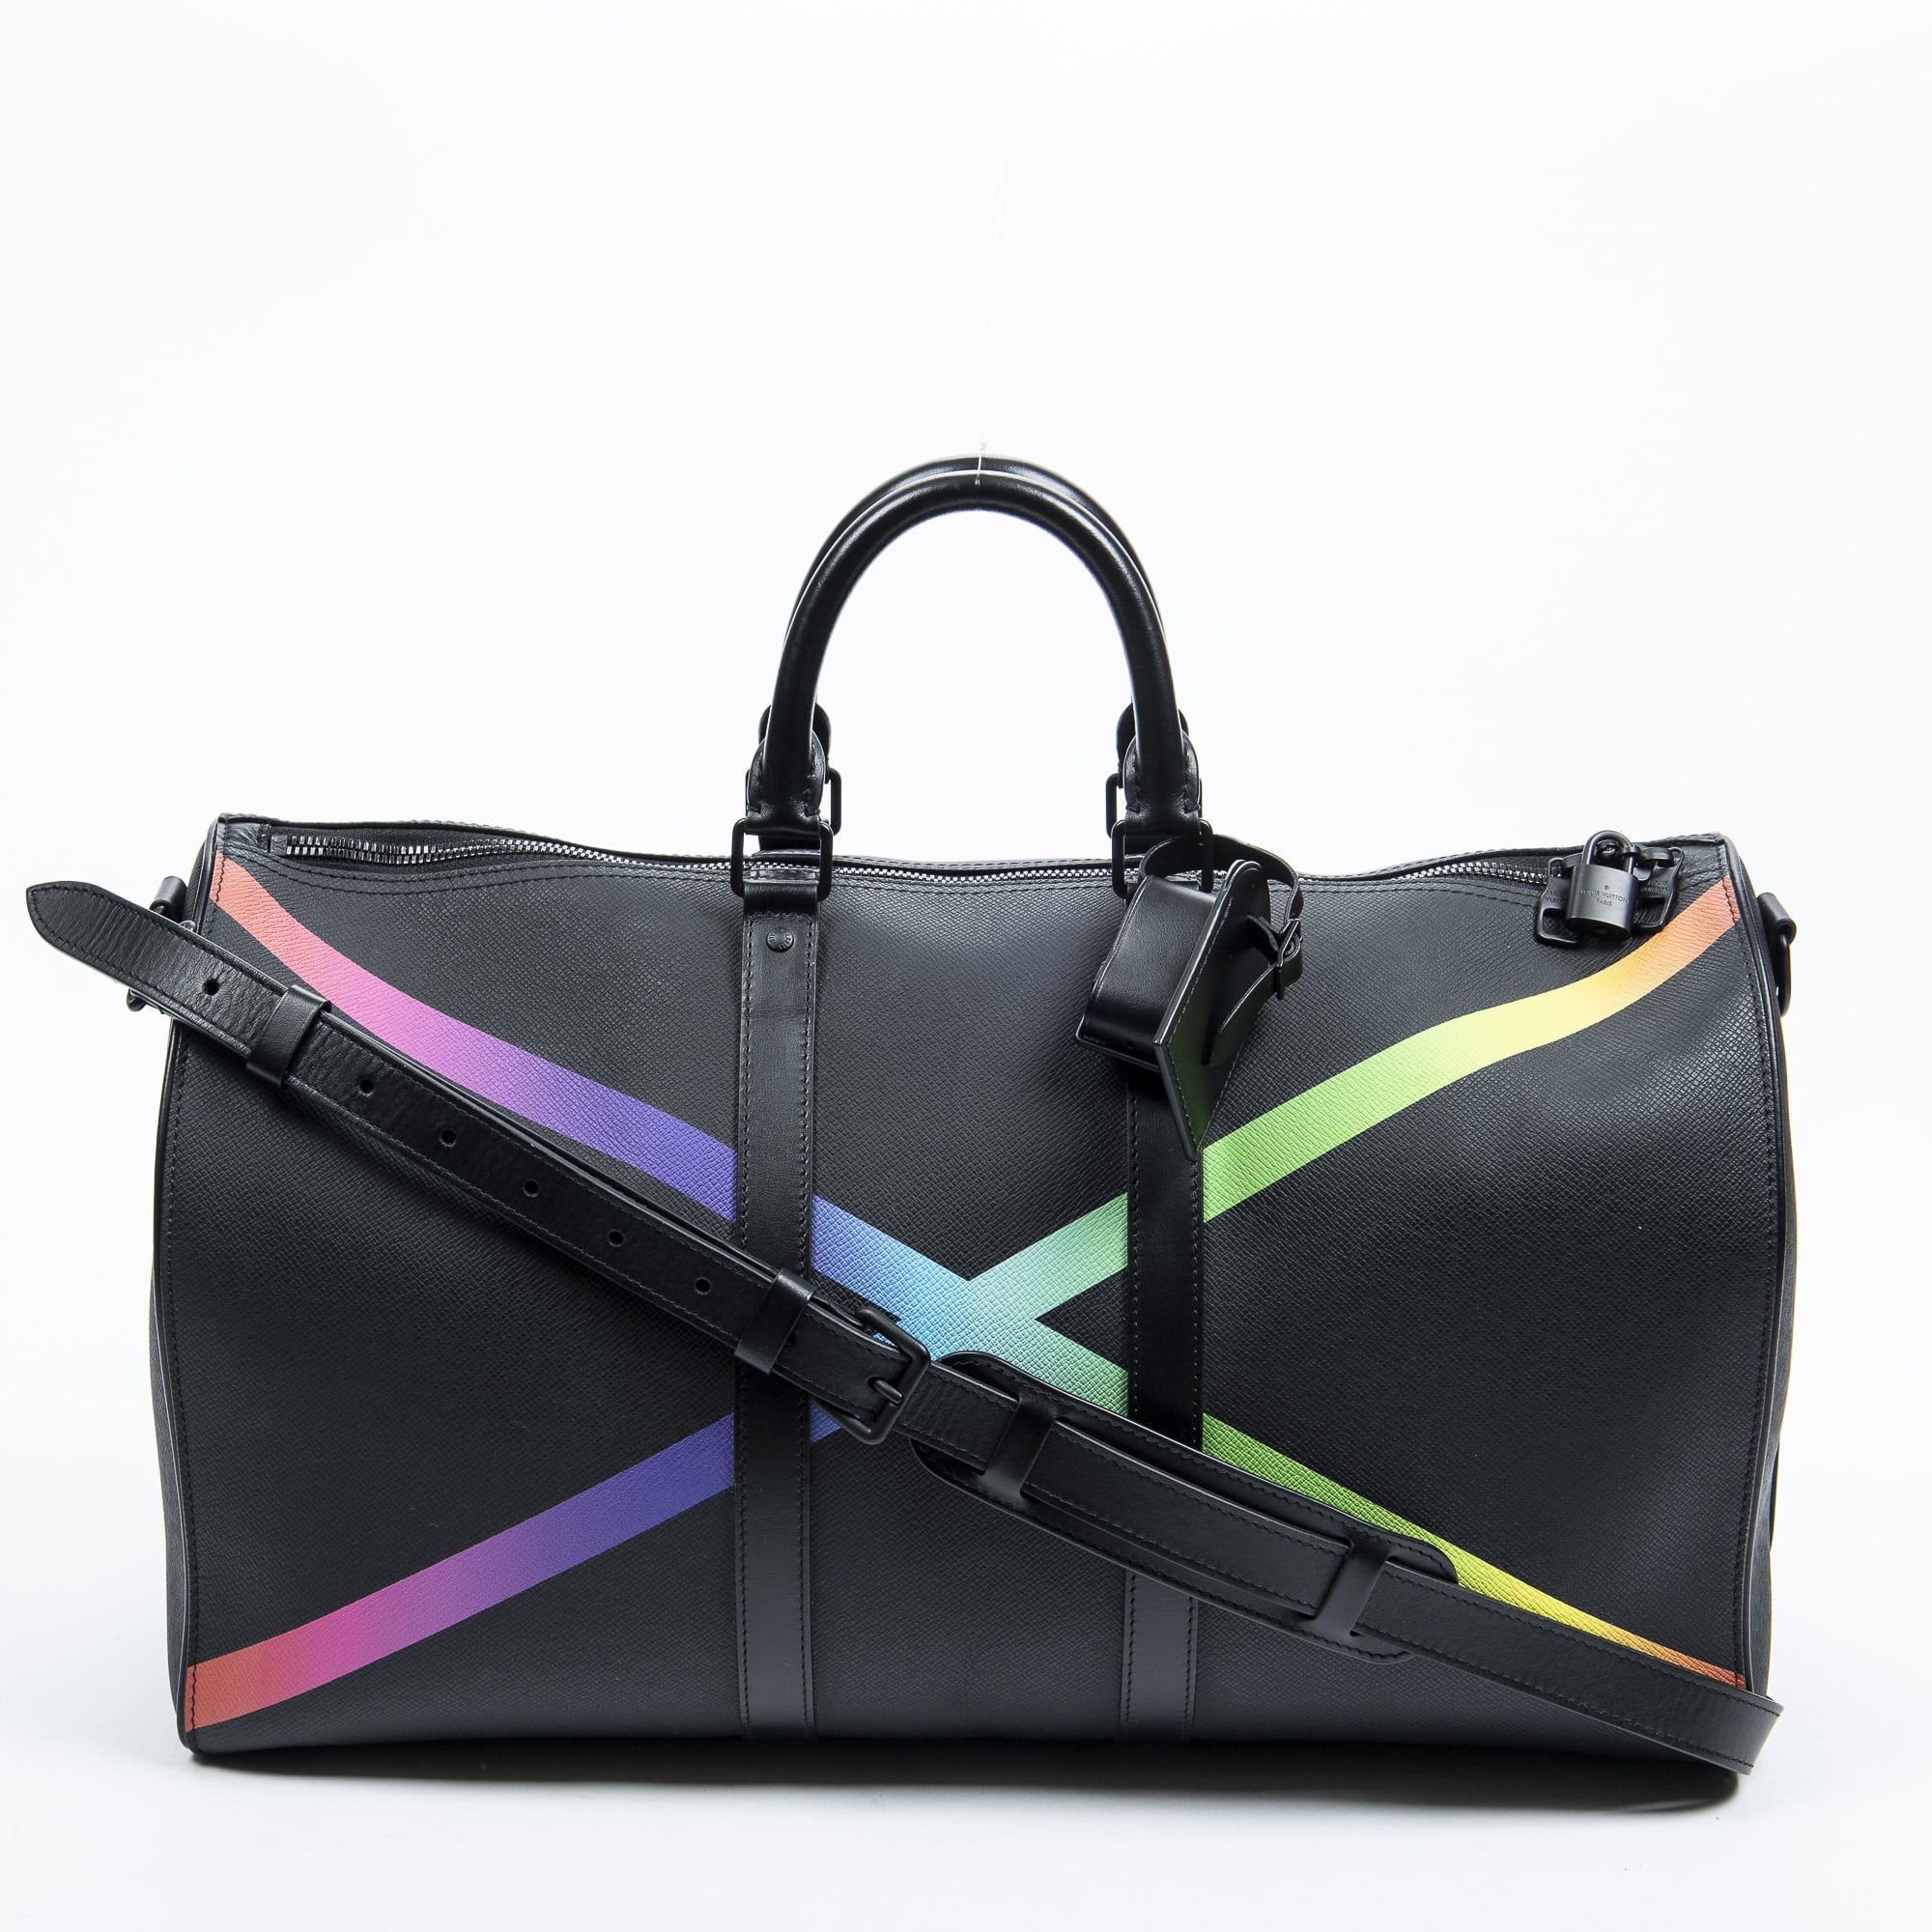 Louis Vuitton on X: Novel reinterpretations. While reflecting the timeless  modernity of the Maison, @VirgilAbloh's passion for music also provides  inspiration for DJ Vivienne and the Trunk Speaker. Explore #LouisVuitton's  Art of